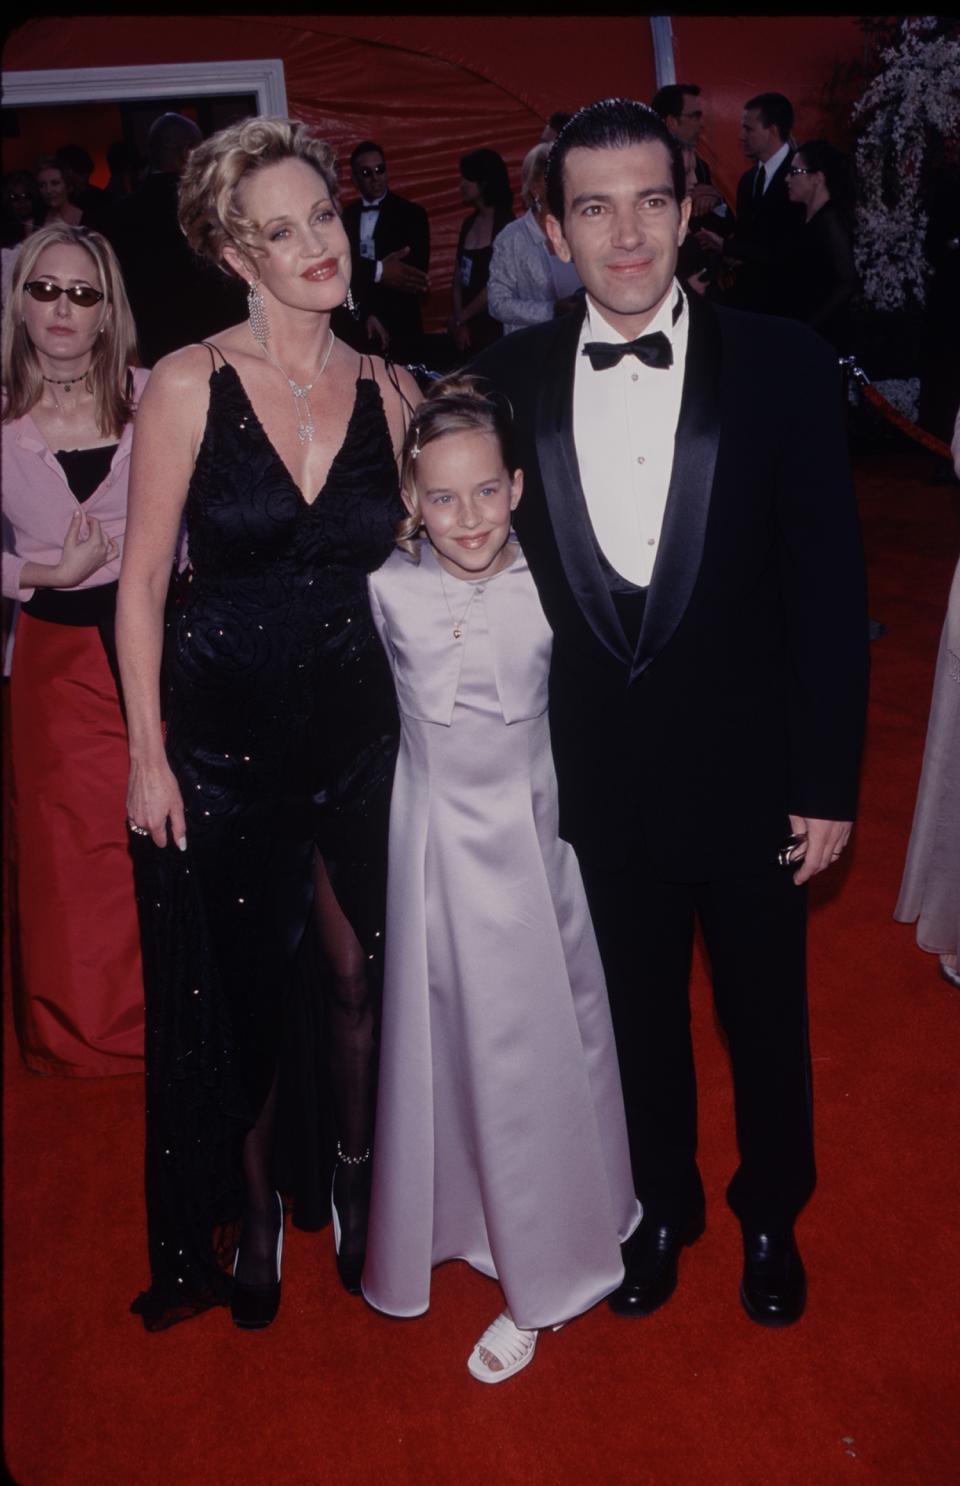 Melanie Griffith, Dakota Johnson, and Antonio Banderas at the 72nd Annual Academy Awards  (Photo by The LIFE Picture Collection via Getty Images)